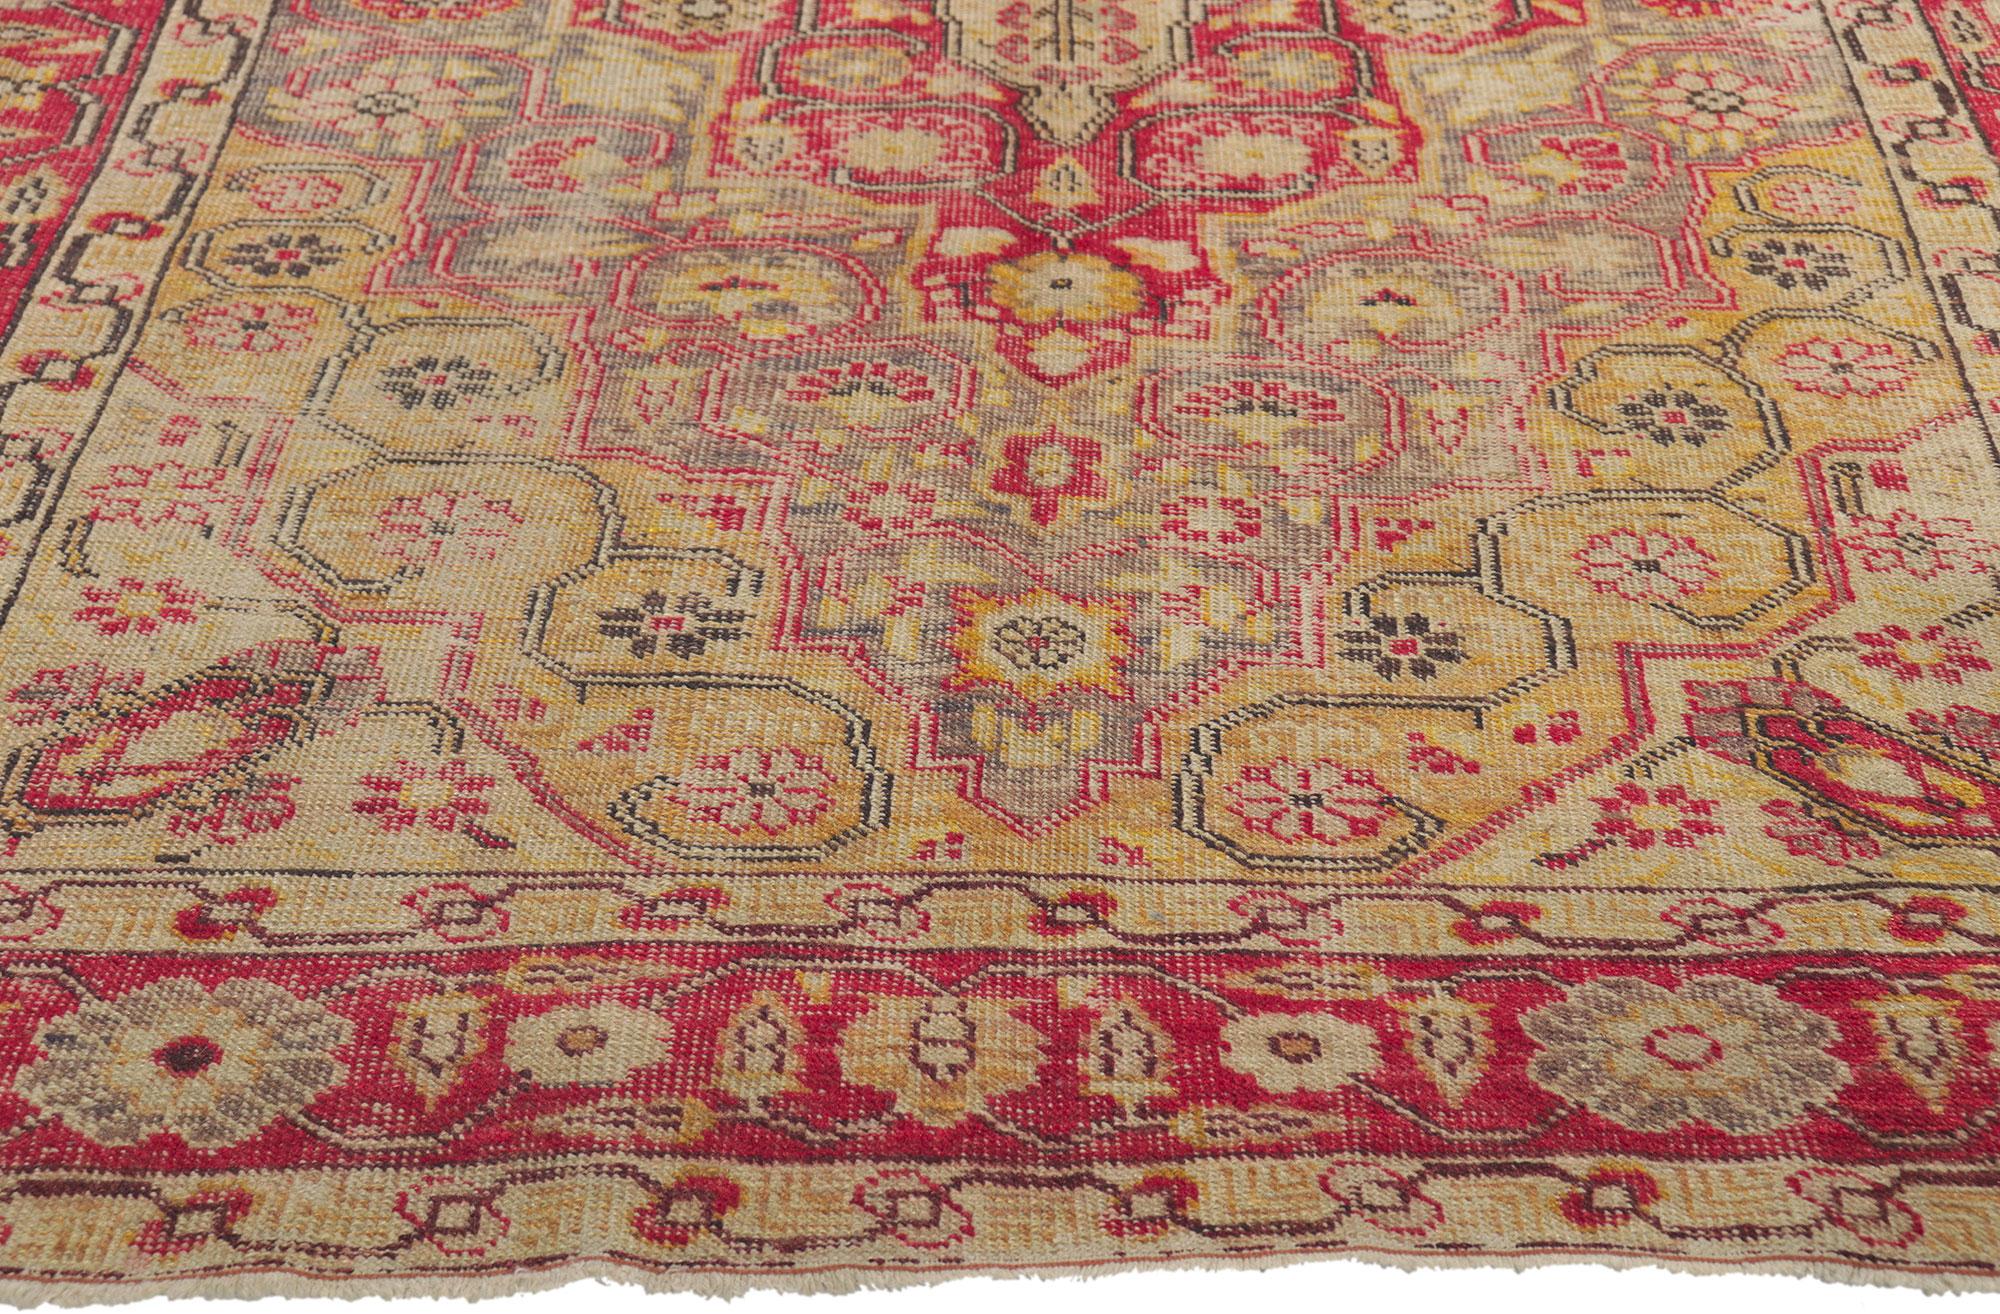 Vintage Turkish Sivas Rug with Rustic Farmhouse Style In Good Condition For Sale In Dallas, TX